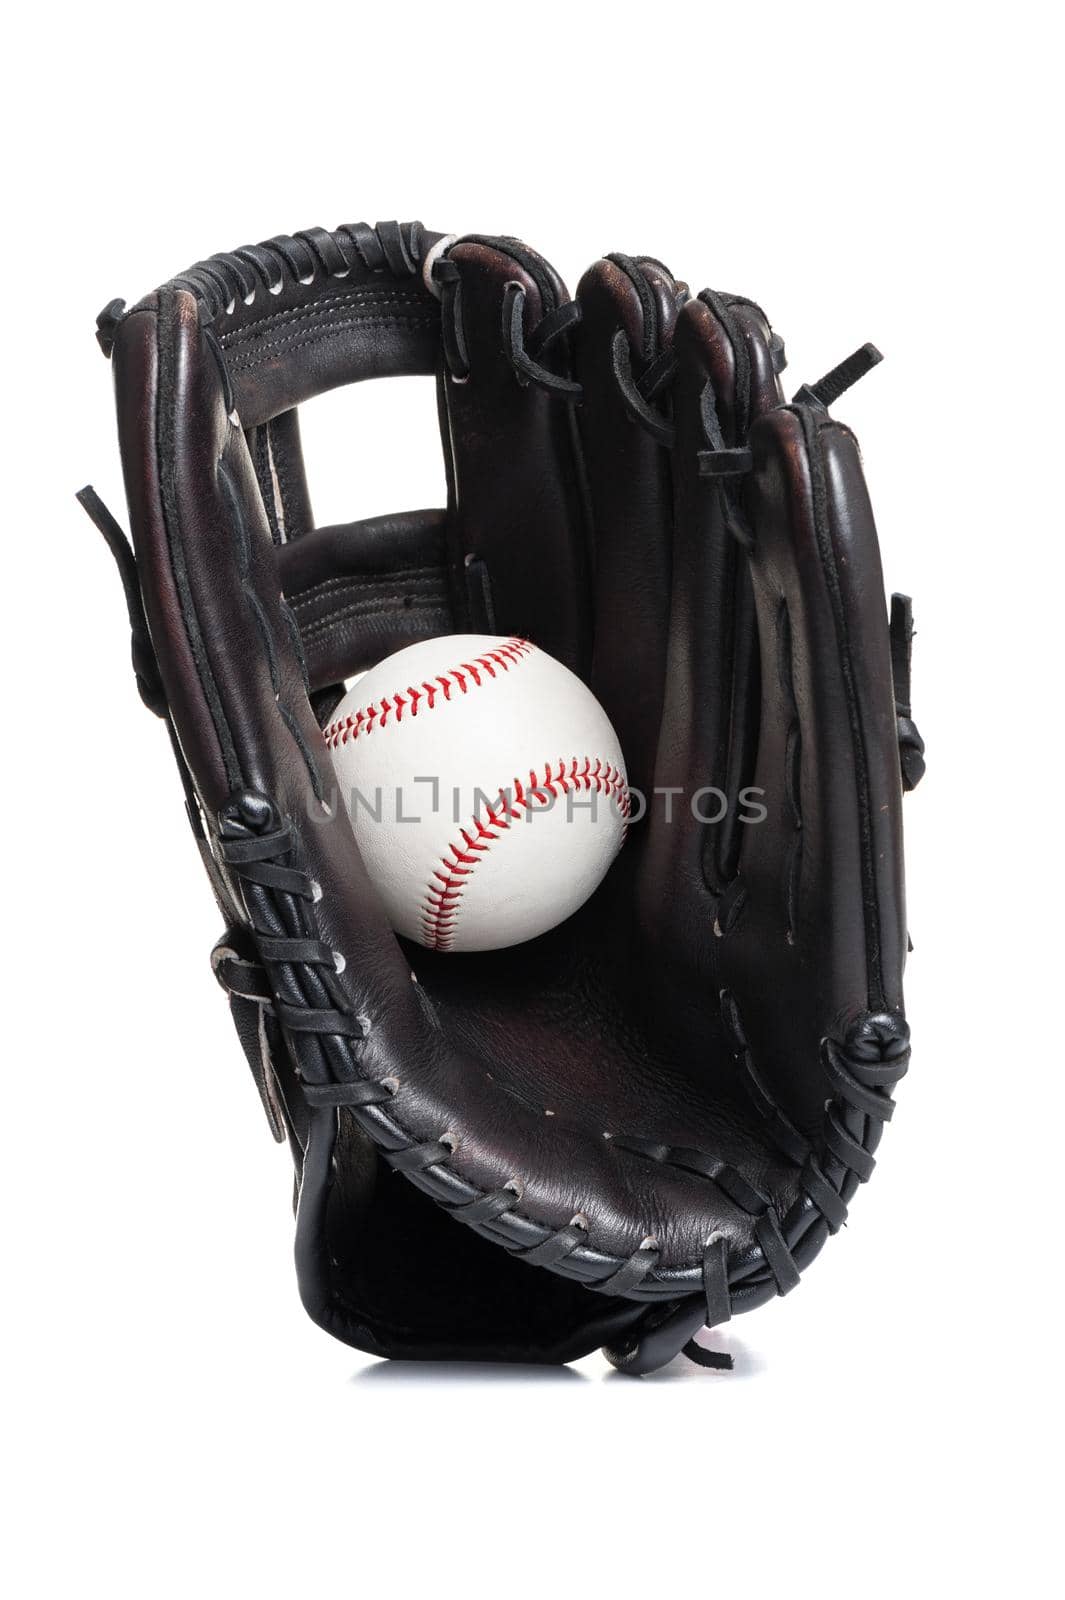 chocolate brown baseball glove with the ball isolated over white background